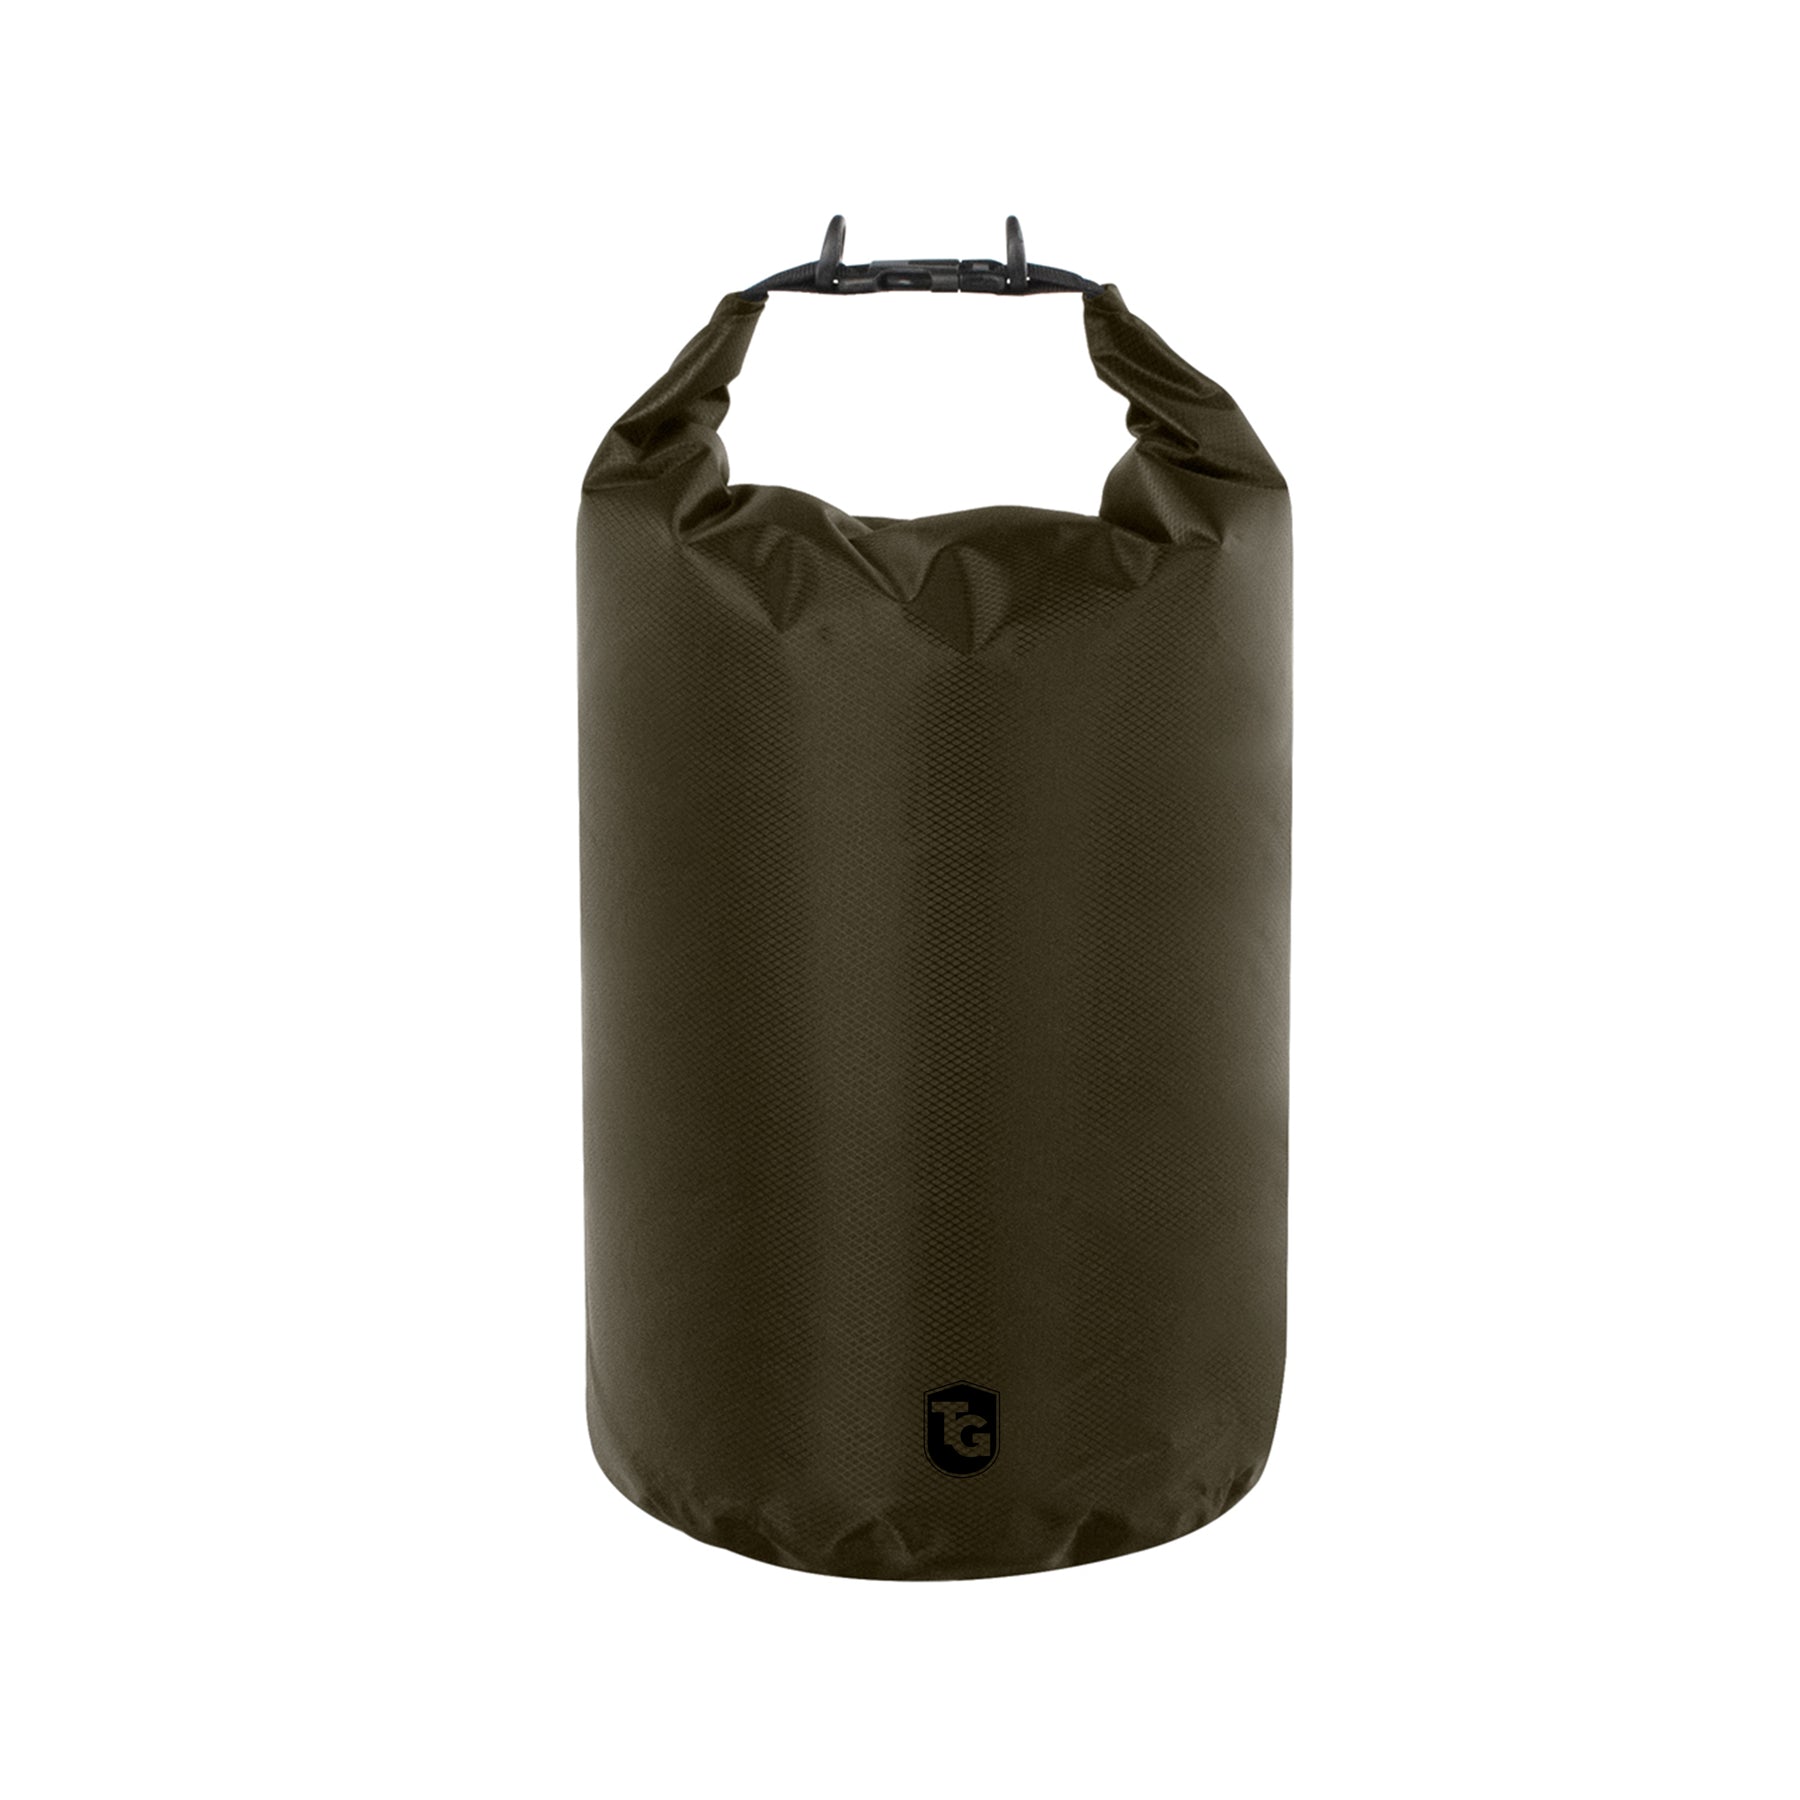 TrailGear 10 liter Heavy-Duty Dry Bag in the olive variation.